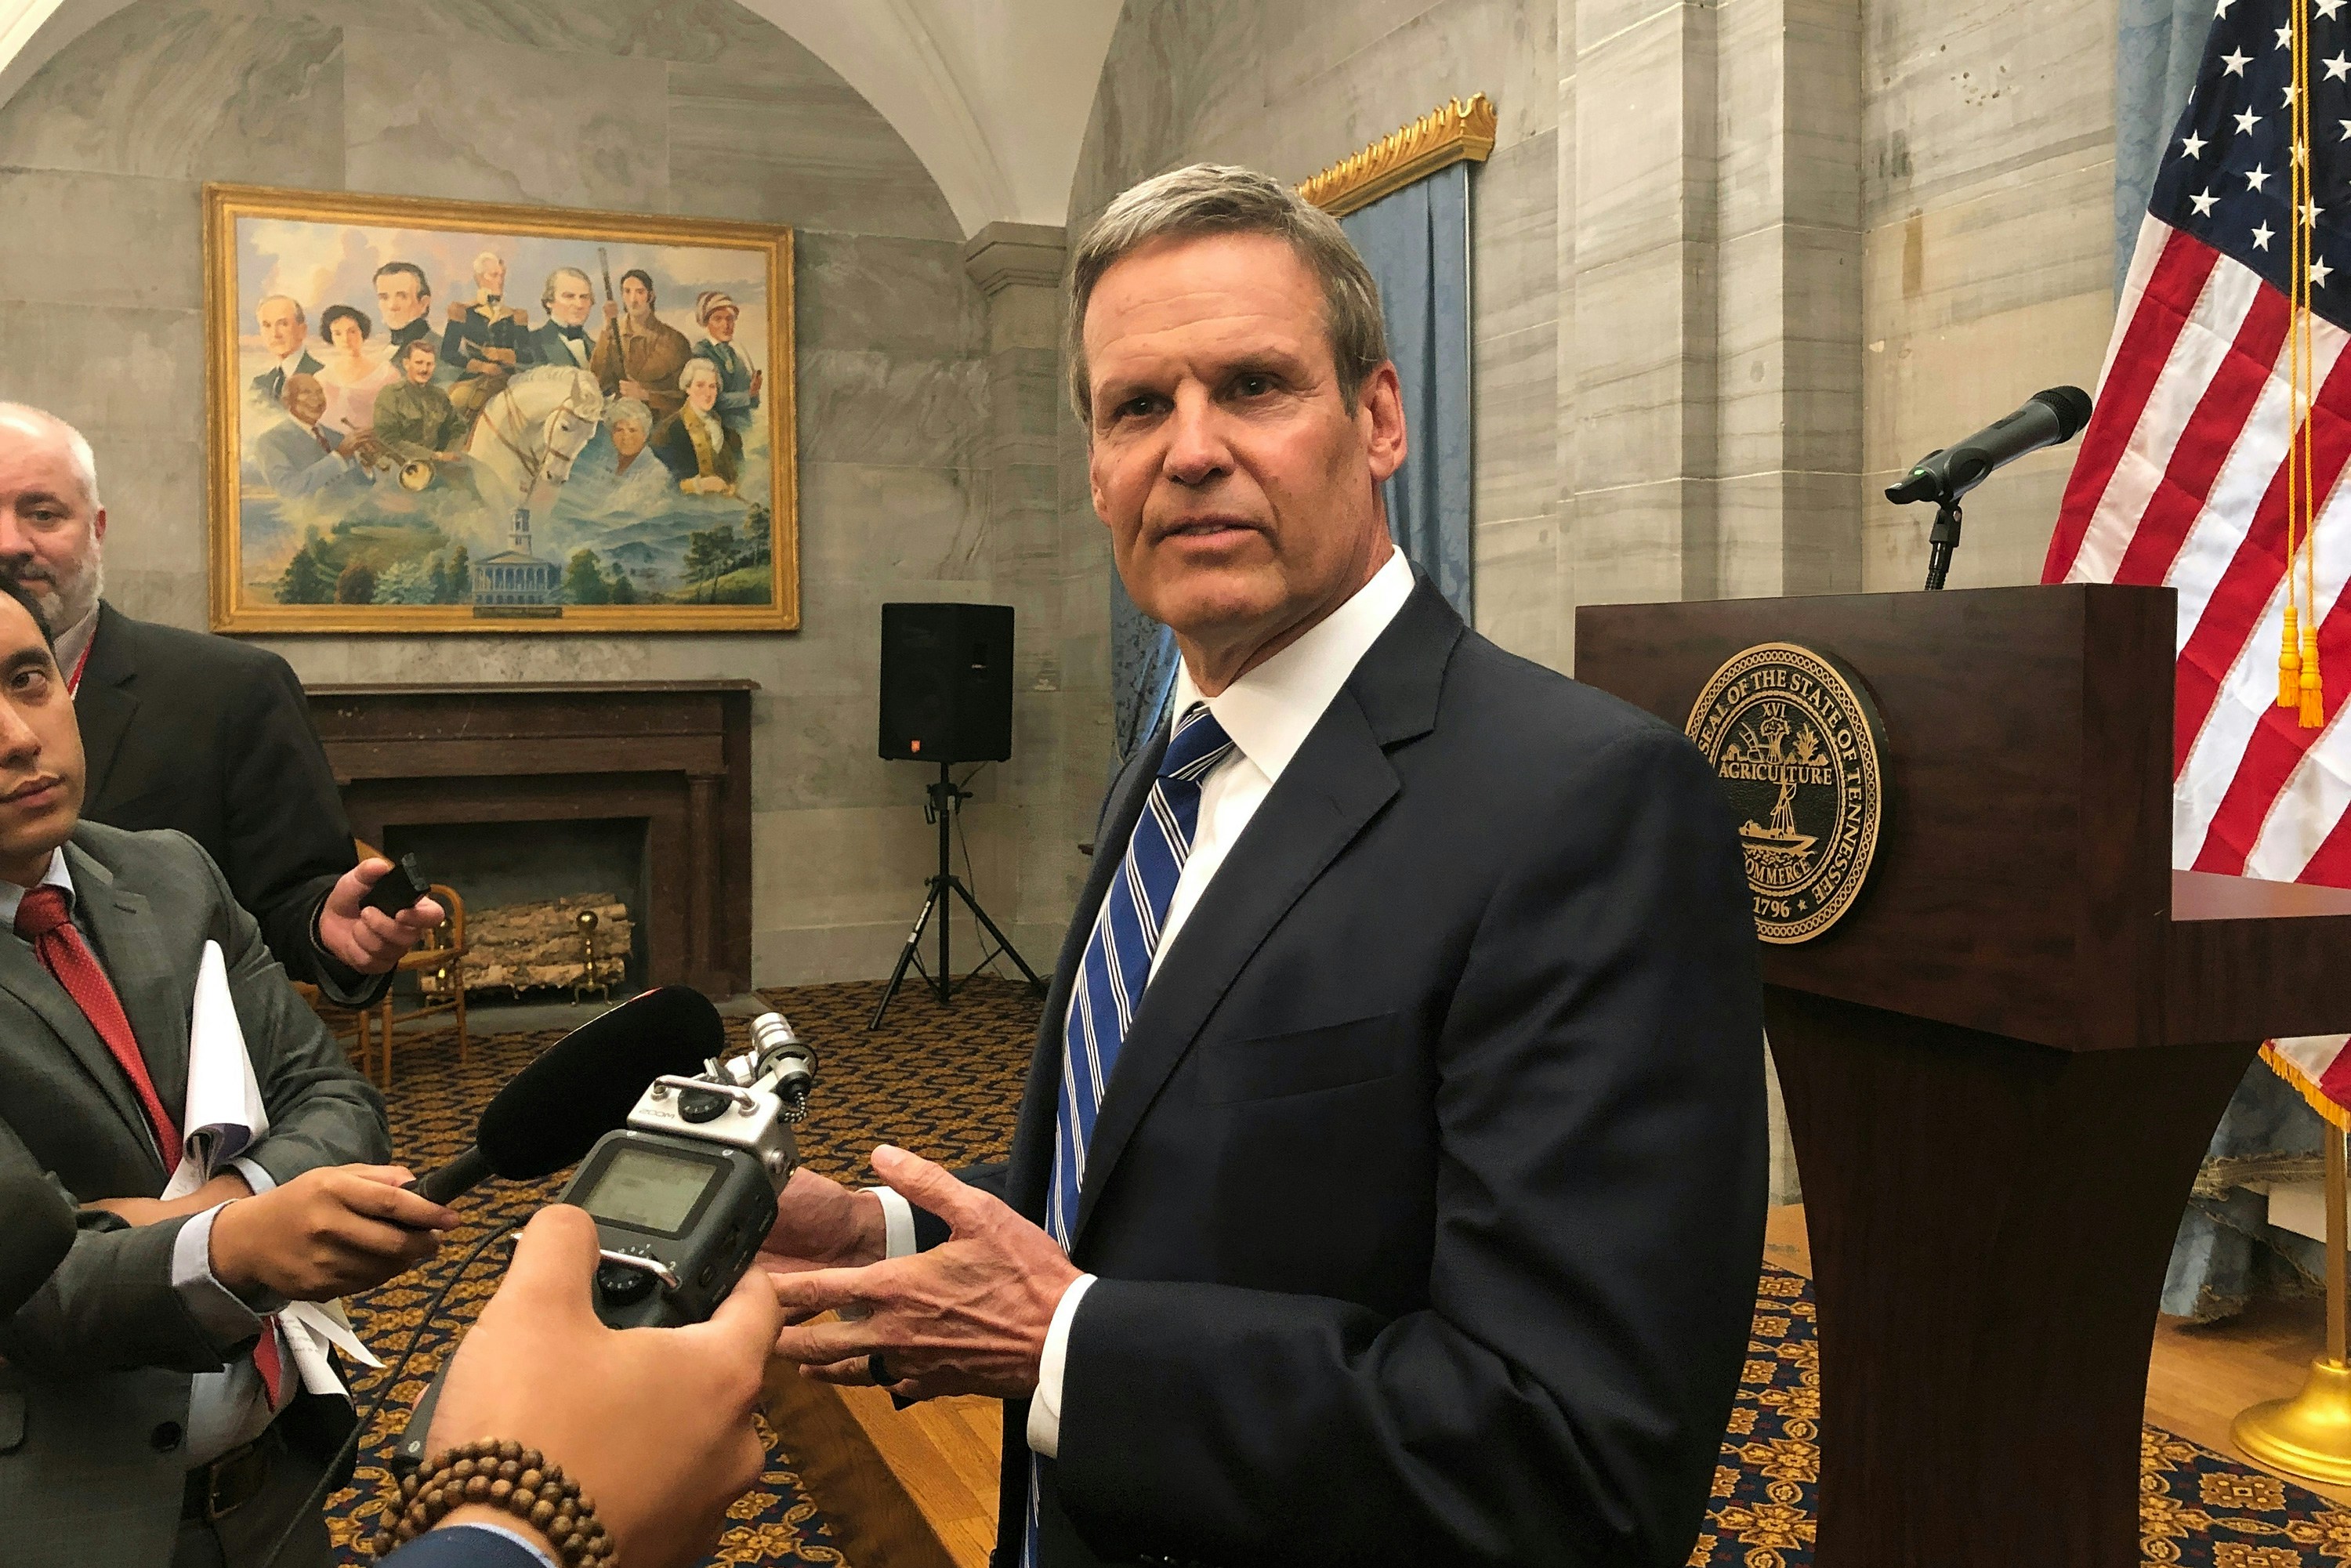 FILE - In this April 25, 2019 file photo, Republican Tennessee Gov. Bill Lee talks to reporters at the Capitol in Nashville, Tenn. More than half of Lee’s newly appointed cabinet members, including his education czar and Tennessee’s Medicaid chief, didn’t submit applications or provide any documents outlining why they deserved the jobs he gave them. The Associated Press reviewed all applications submitted to Lee’s office during his transition into the top statewide position.  This included submissions for both cabinet spots and lower level jobs inside the executive branch. (AP Photo/Kimberlee Kruesi, File)